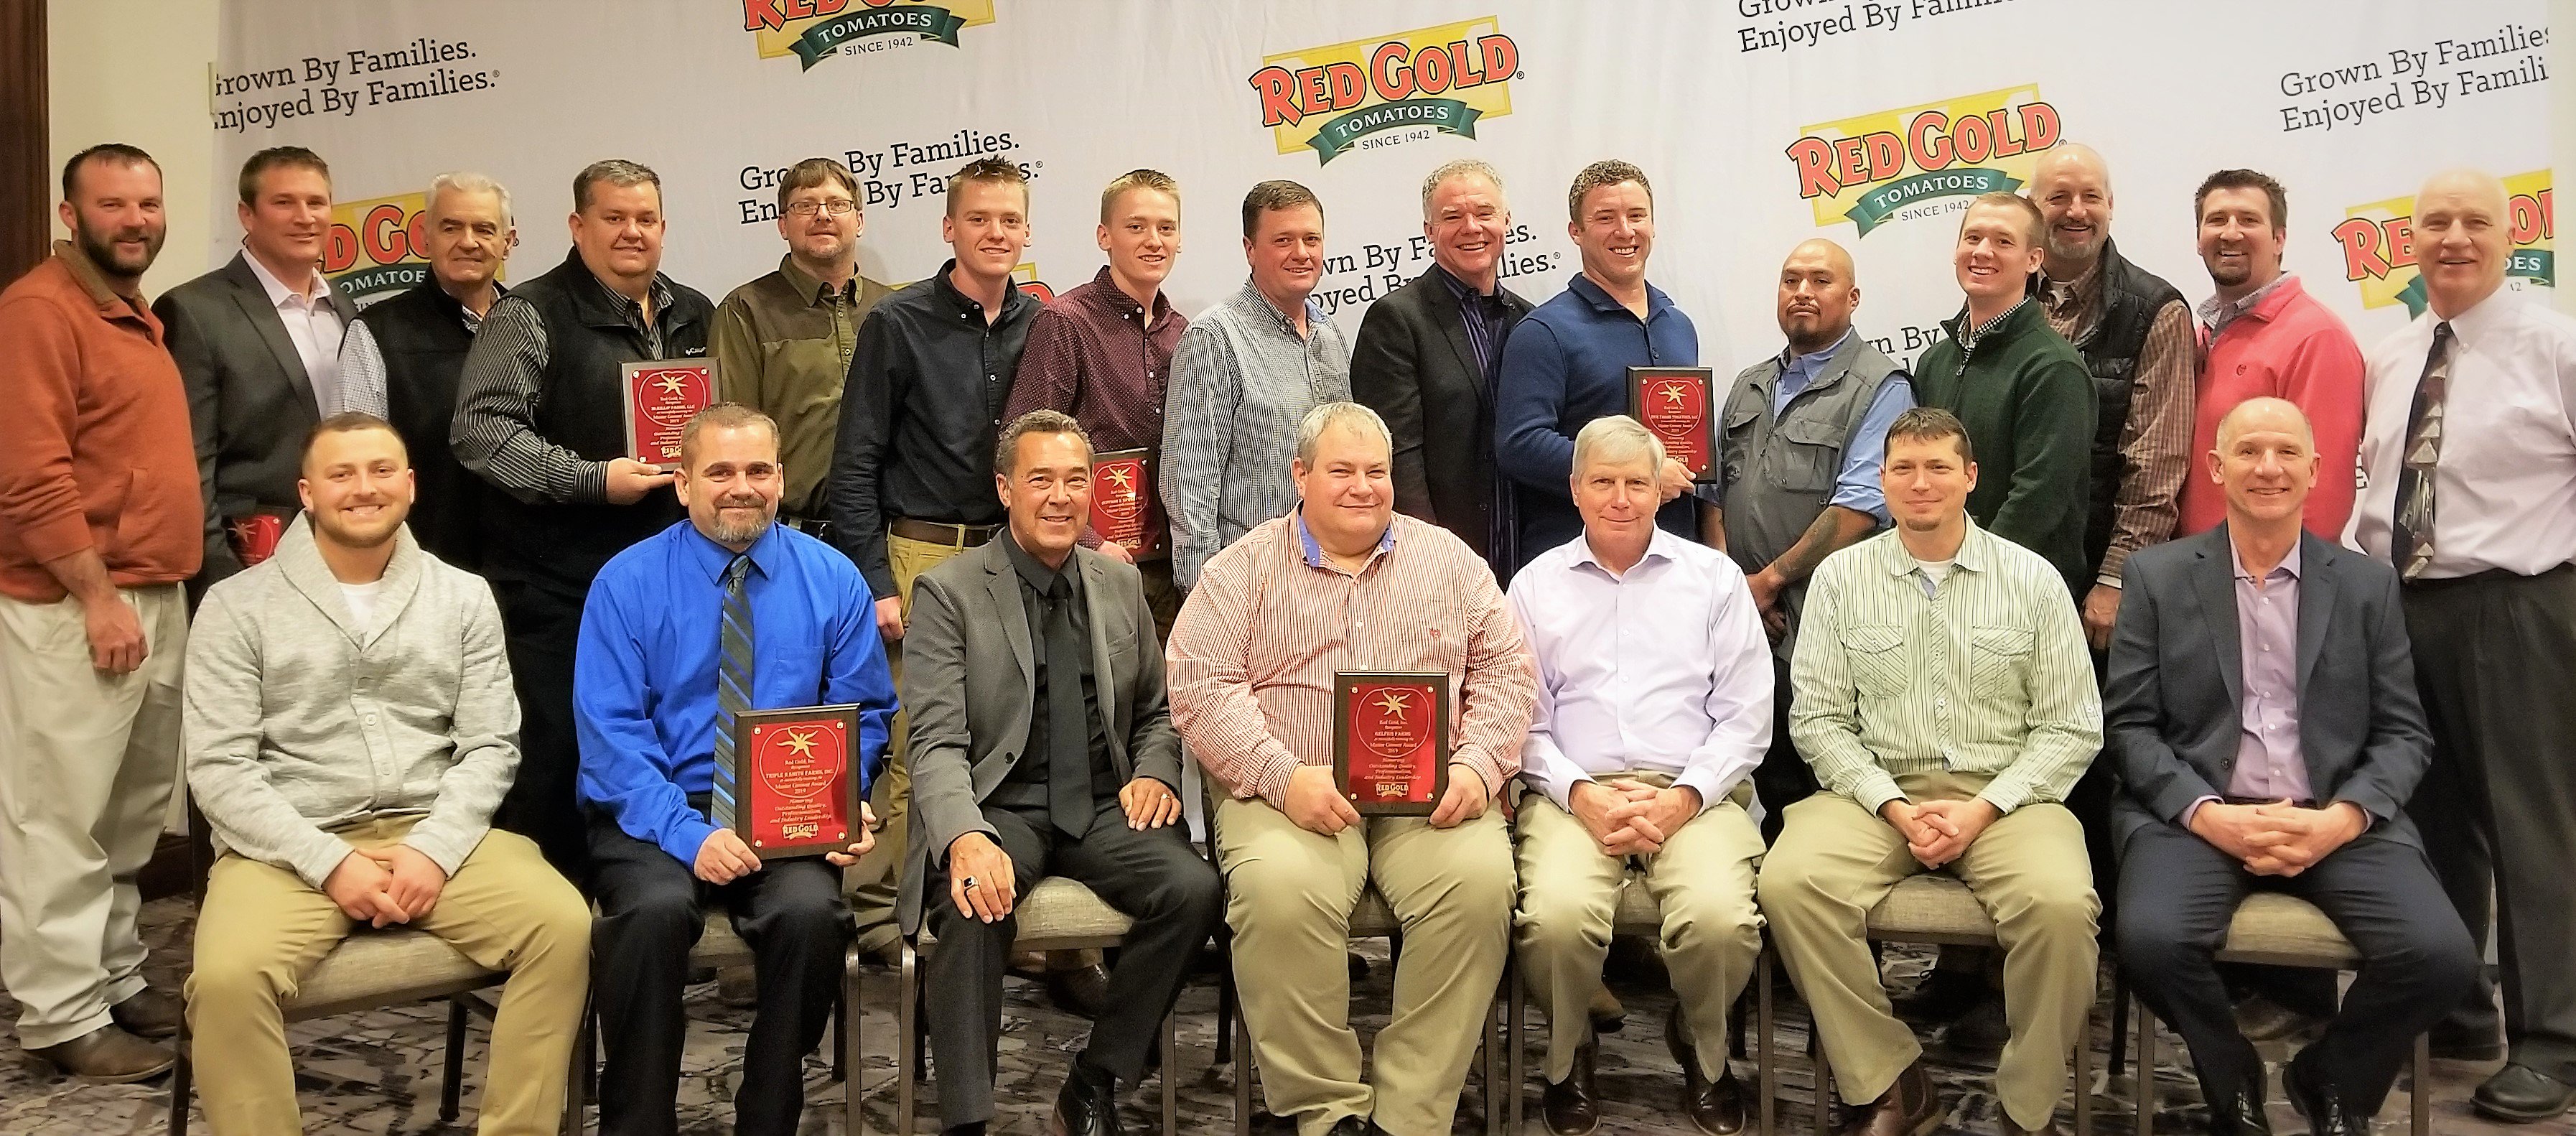 Master Grower Award Winners 2019 Group Photo at Growers Banquet 2020